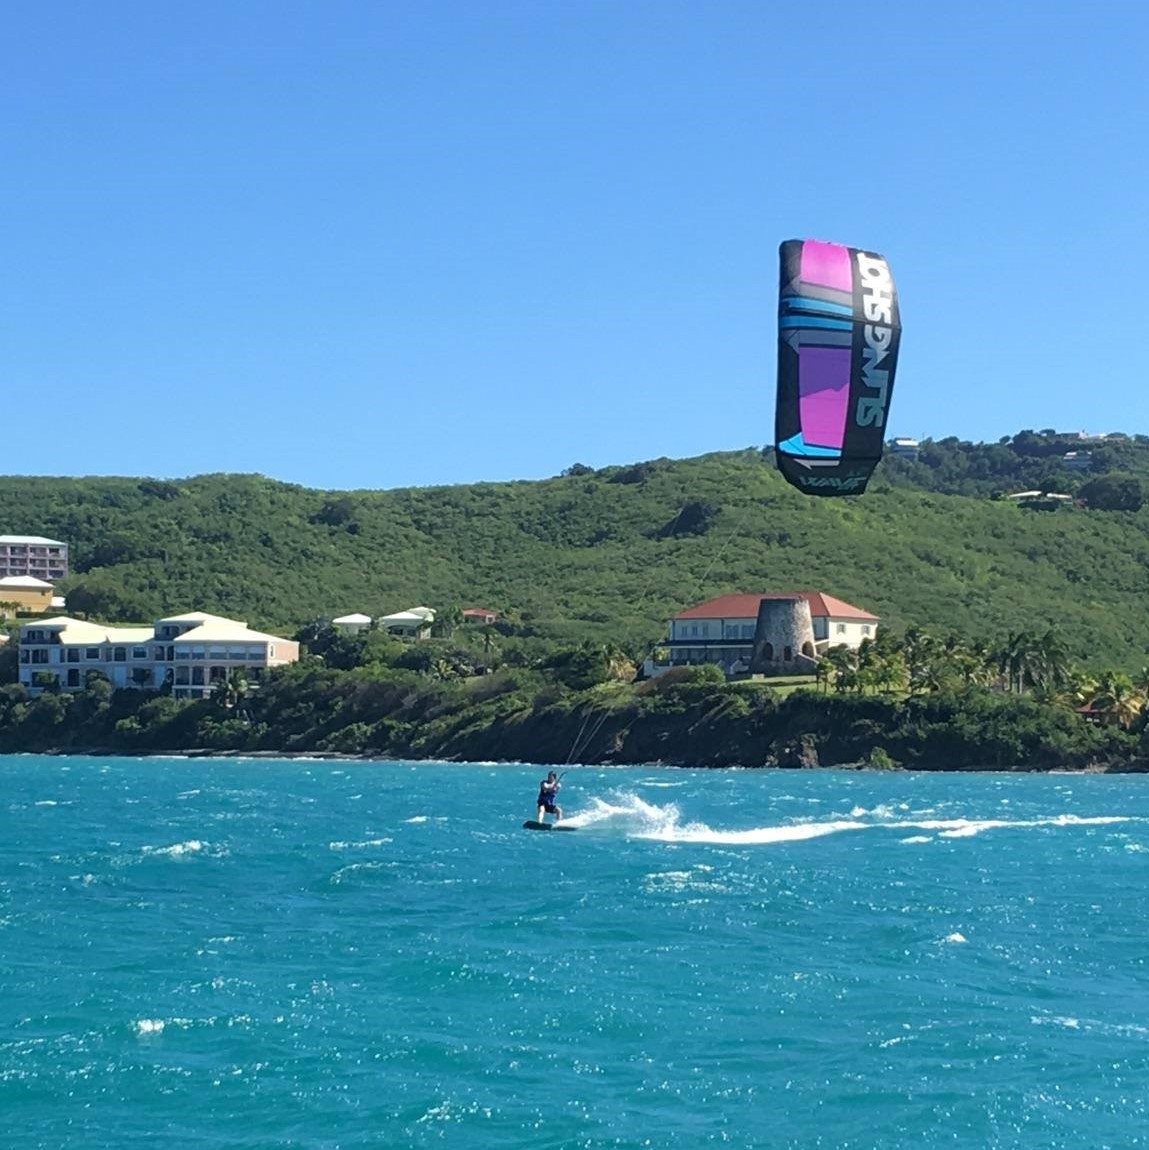 Beautiful day at kite St. Croix for kite lessons.